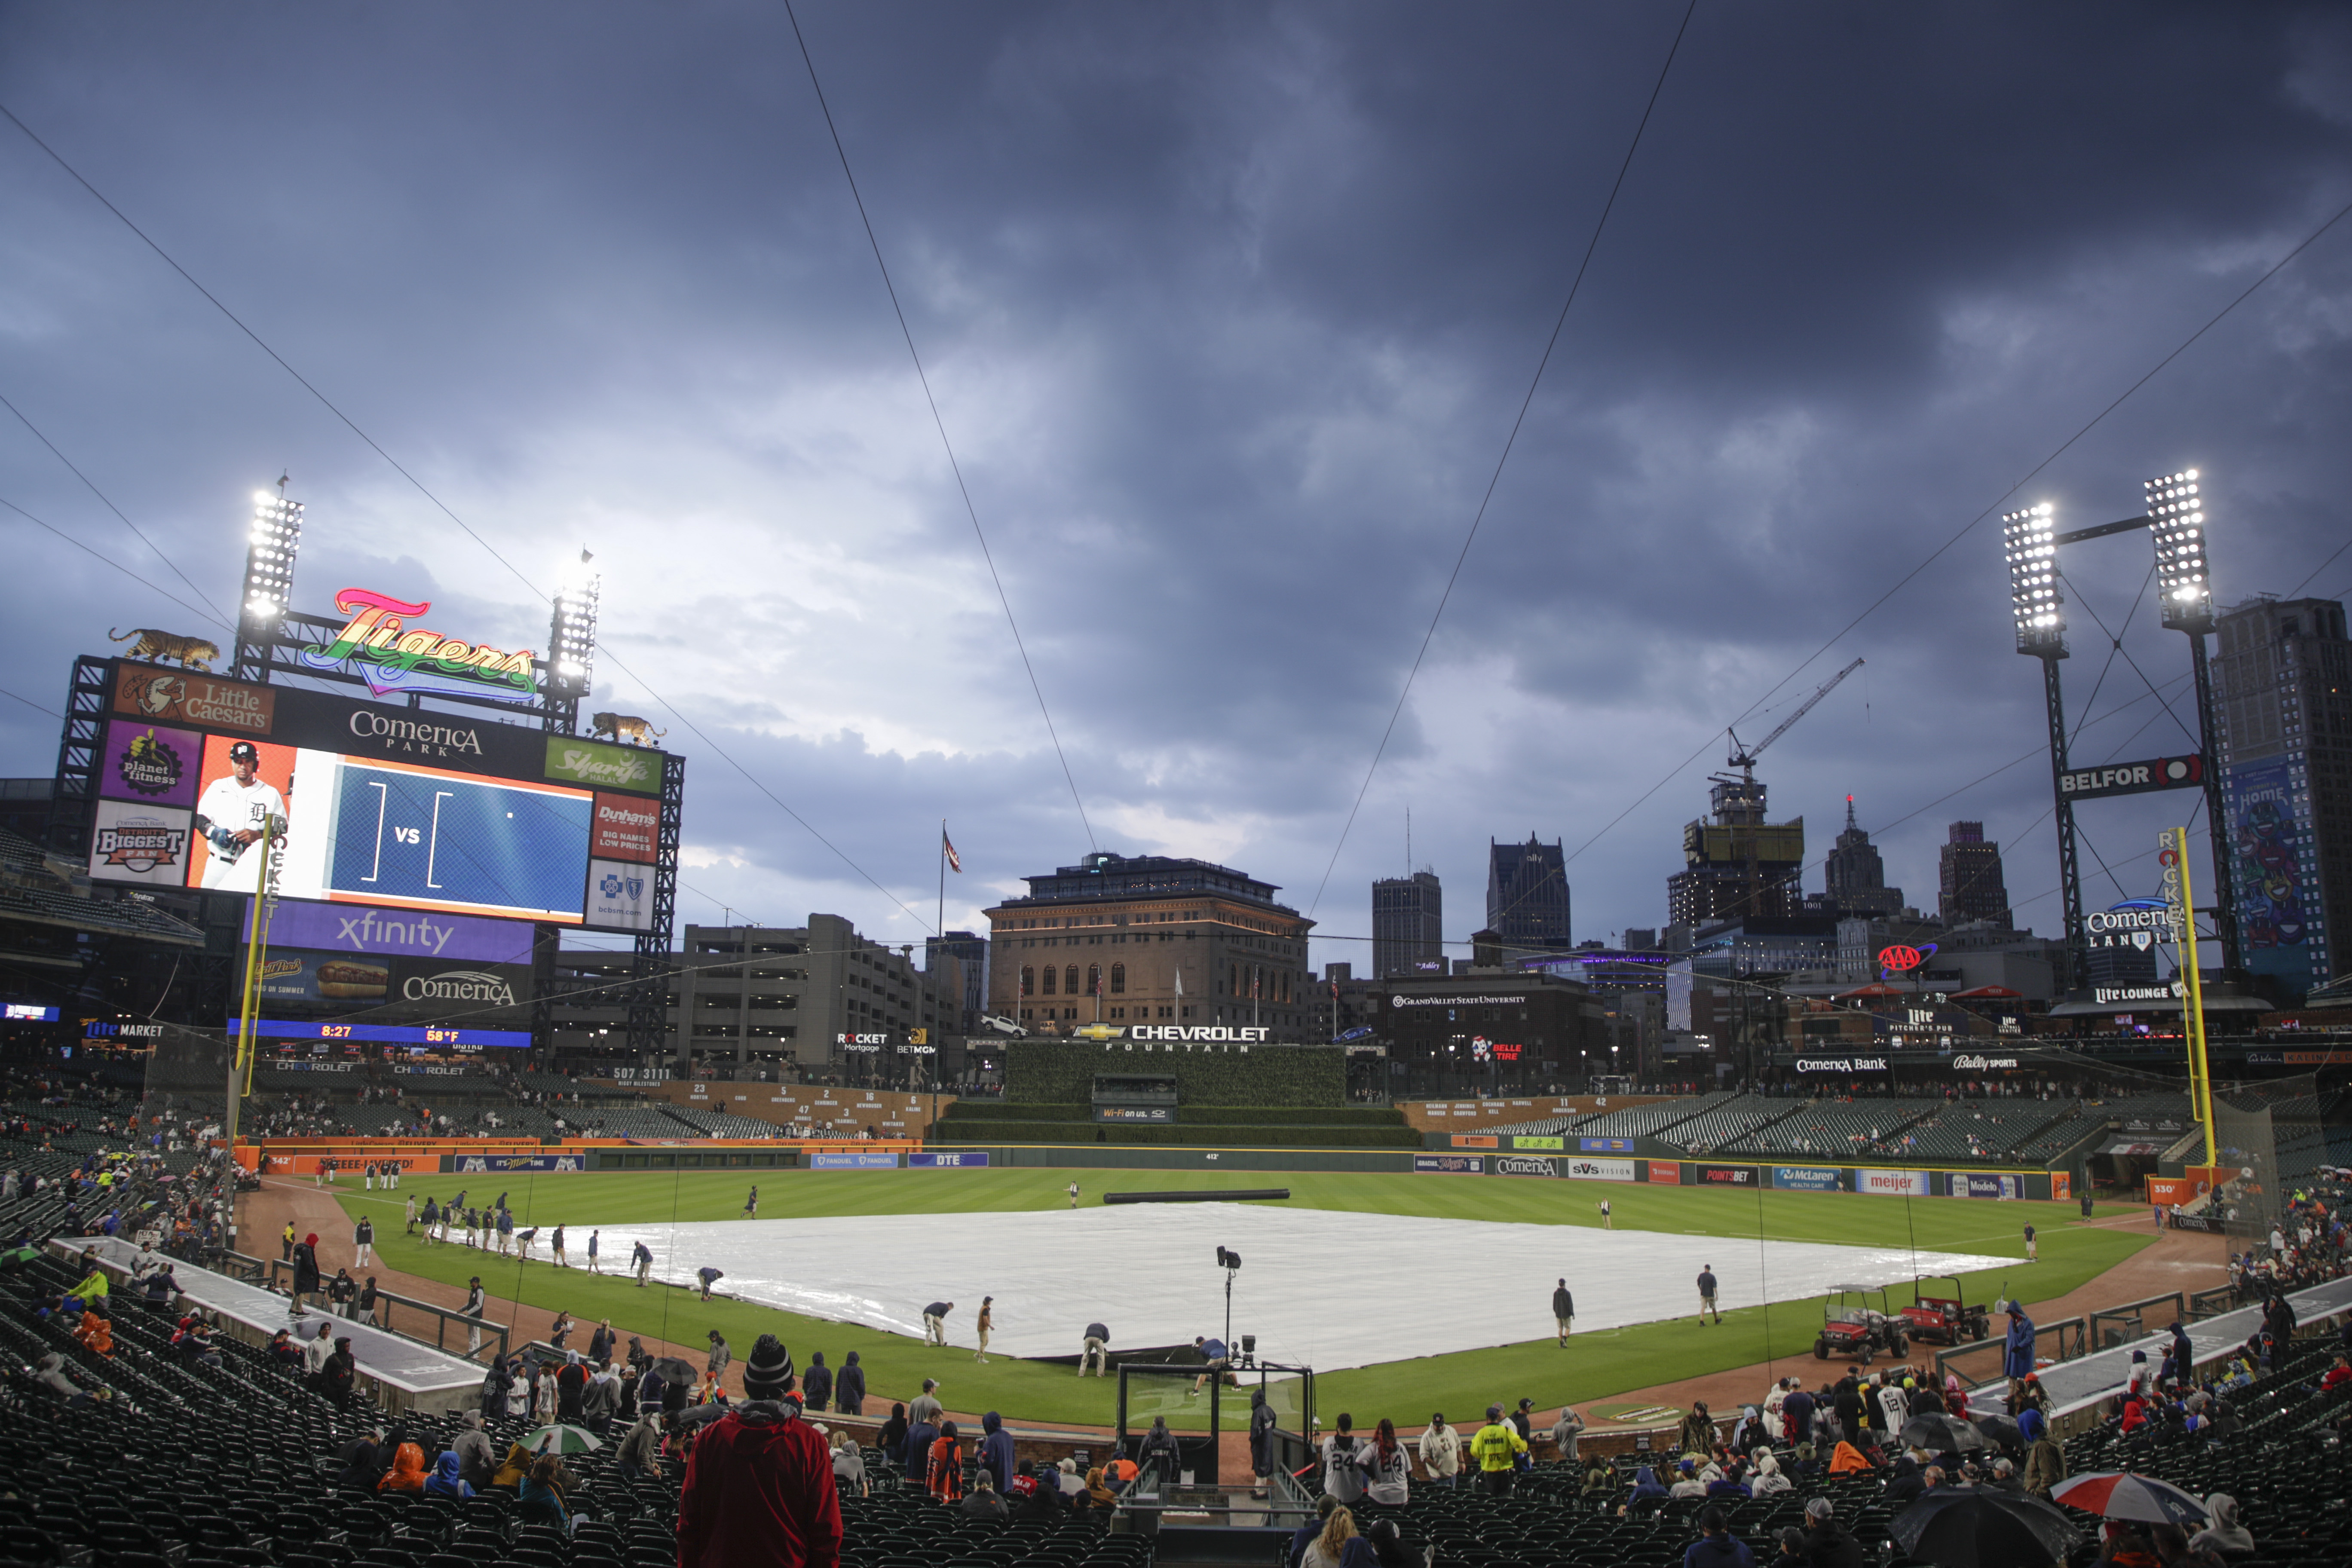 Comerica Park in Detroit opens without limited capacity